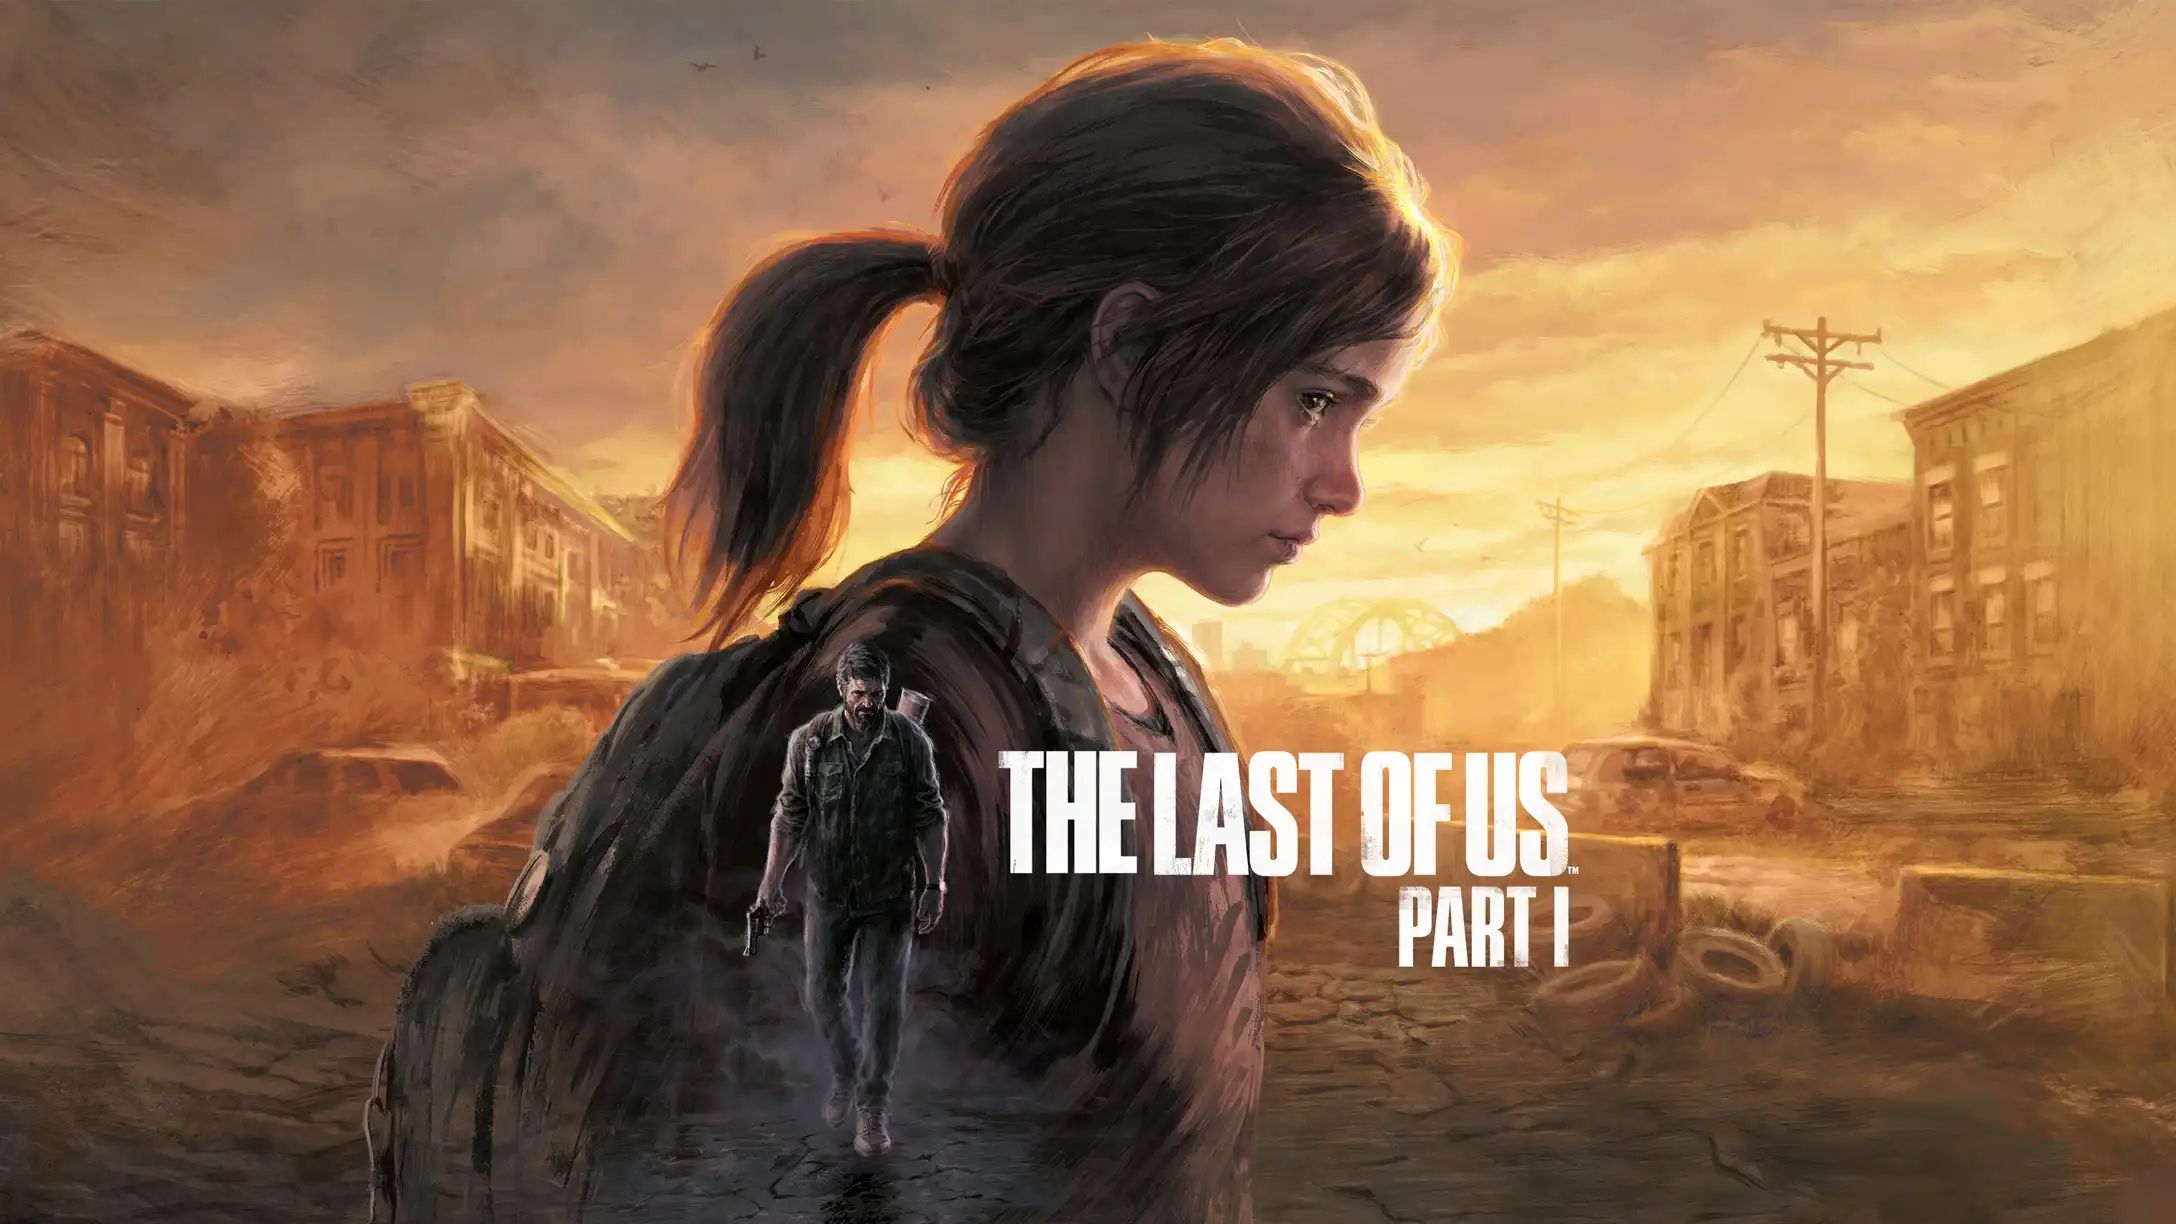 Image for The Last of Us dev says remake of game that's only a decade old isn't "just a cash grab"